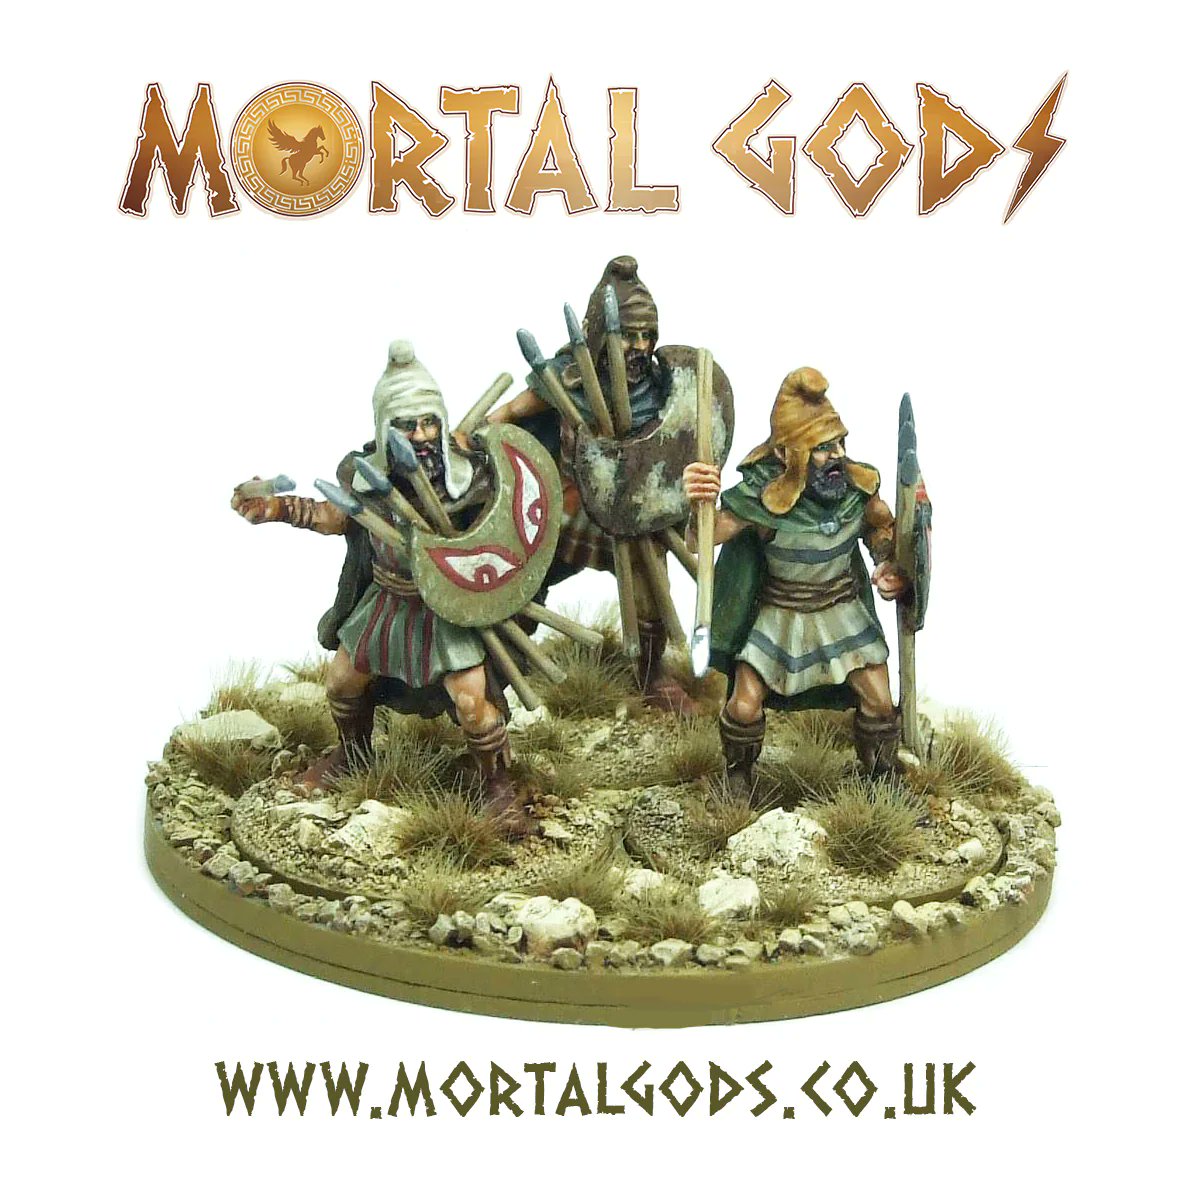 •Thrakian Peltast•
Hit and run is the order of the day until the time is right to just hit
tinyurl.com/37brpb62
#MythicGods #MortalGods #AncientGreece #Greece #Ancients #footsore #footsoreminiatures #SPG #wargaming #warmongers #gaming #minwargaming #tabletopgames #miniatures